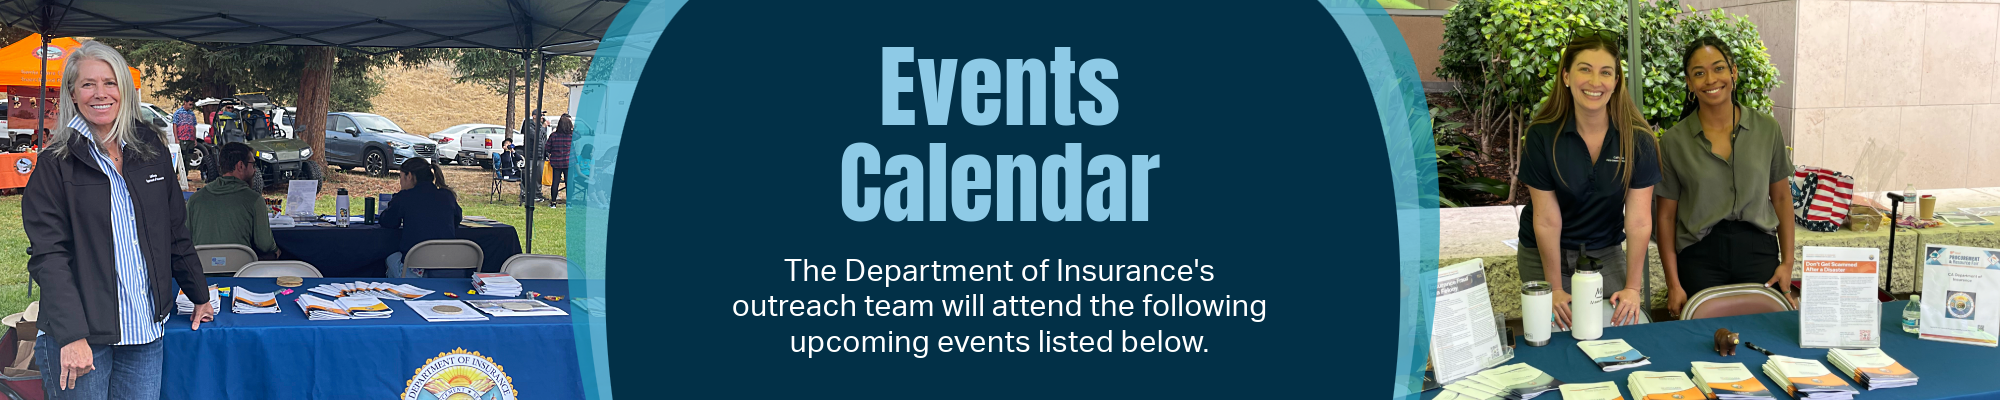 Events Calendar - The Department of Insurance's outreach team will attend the following upcoming events listed below. 